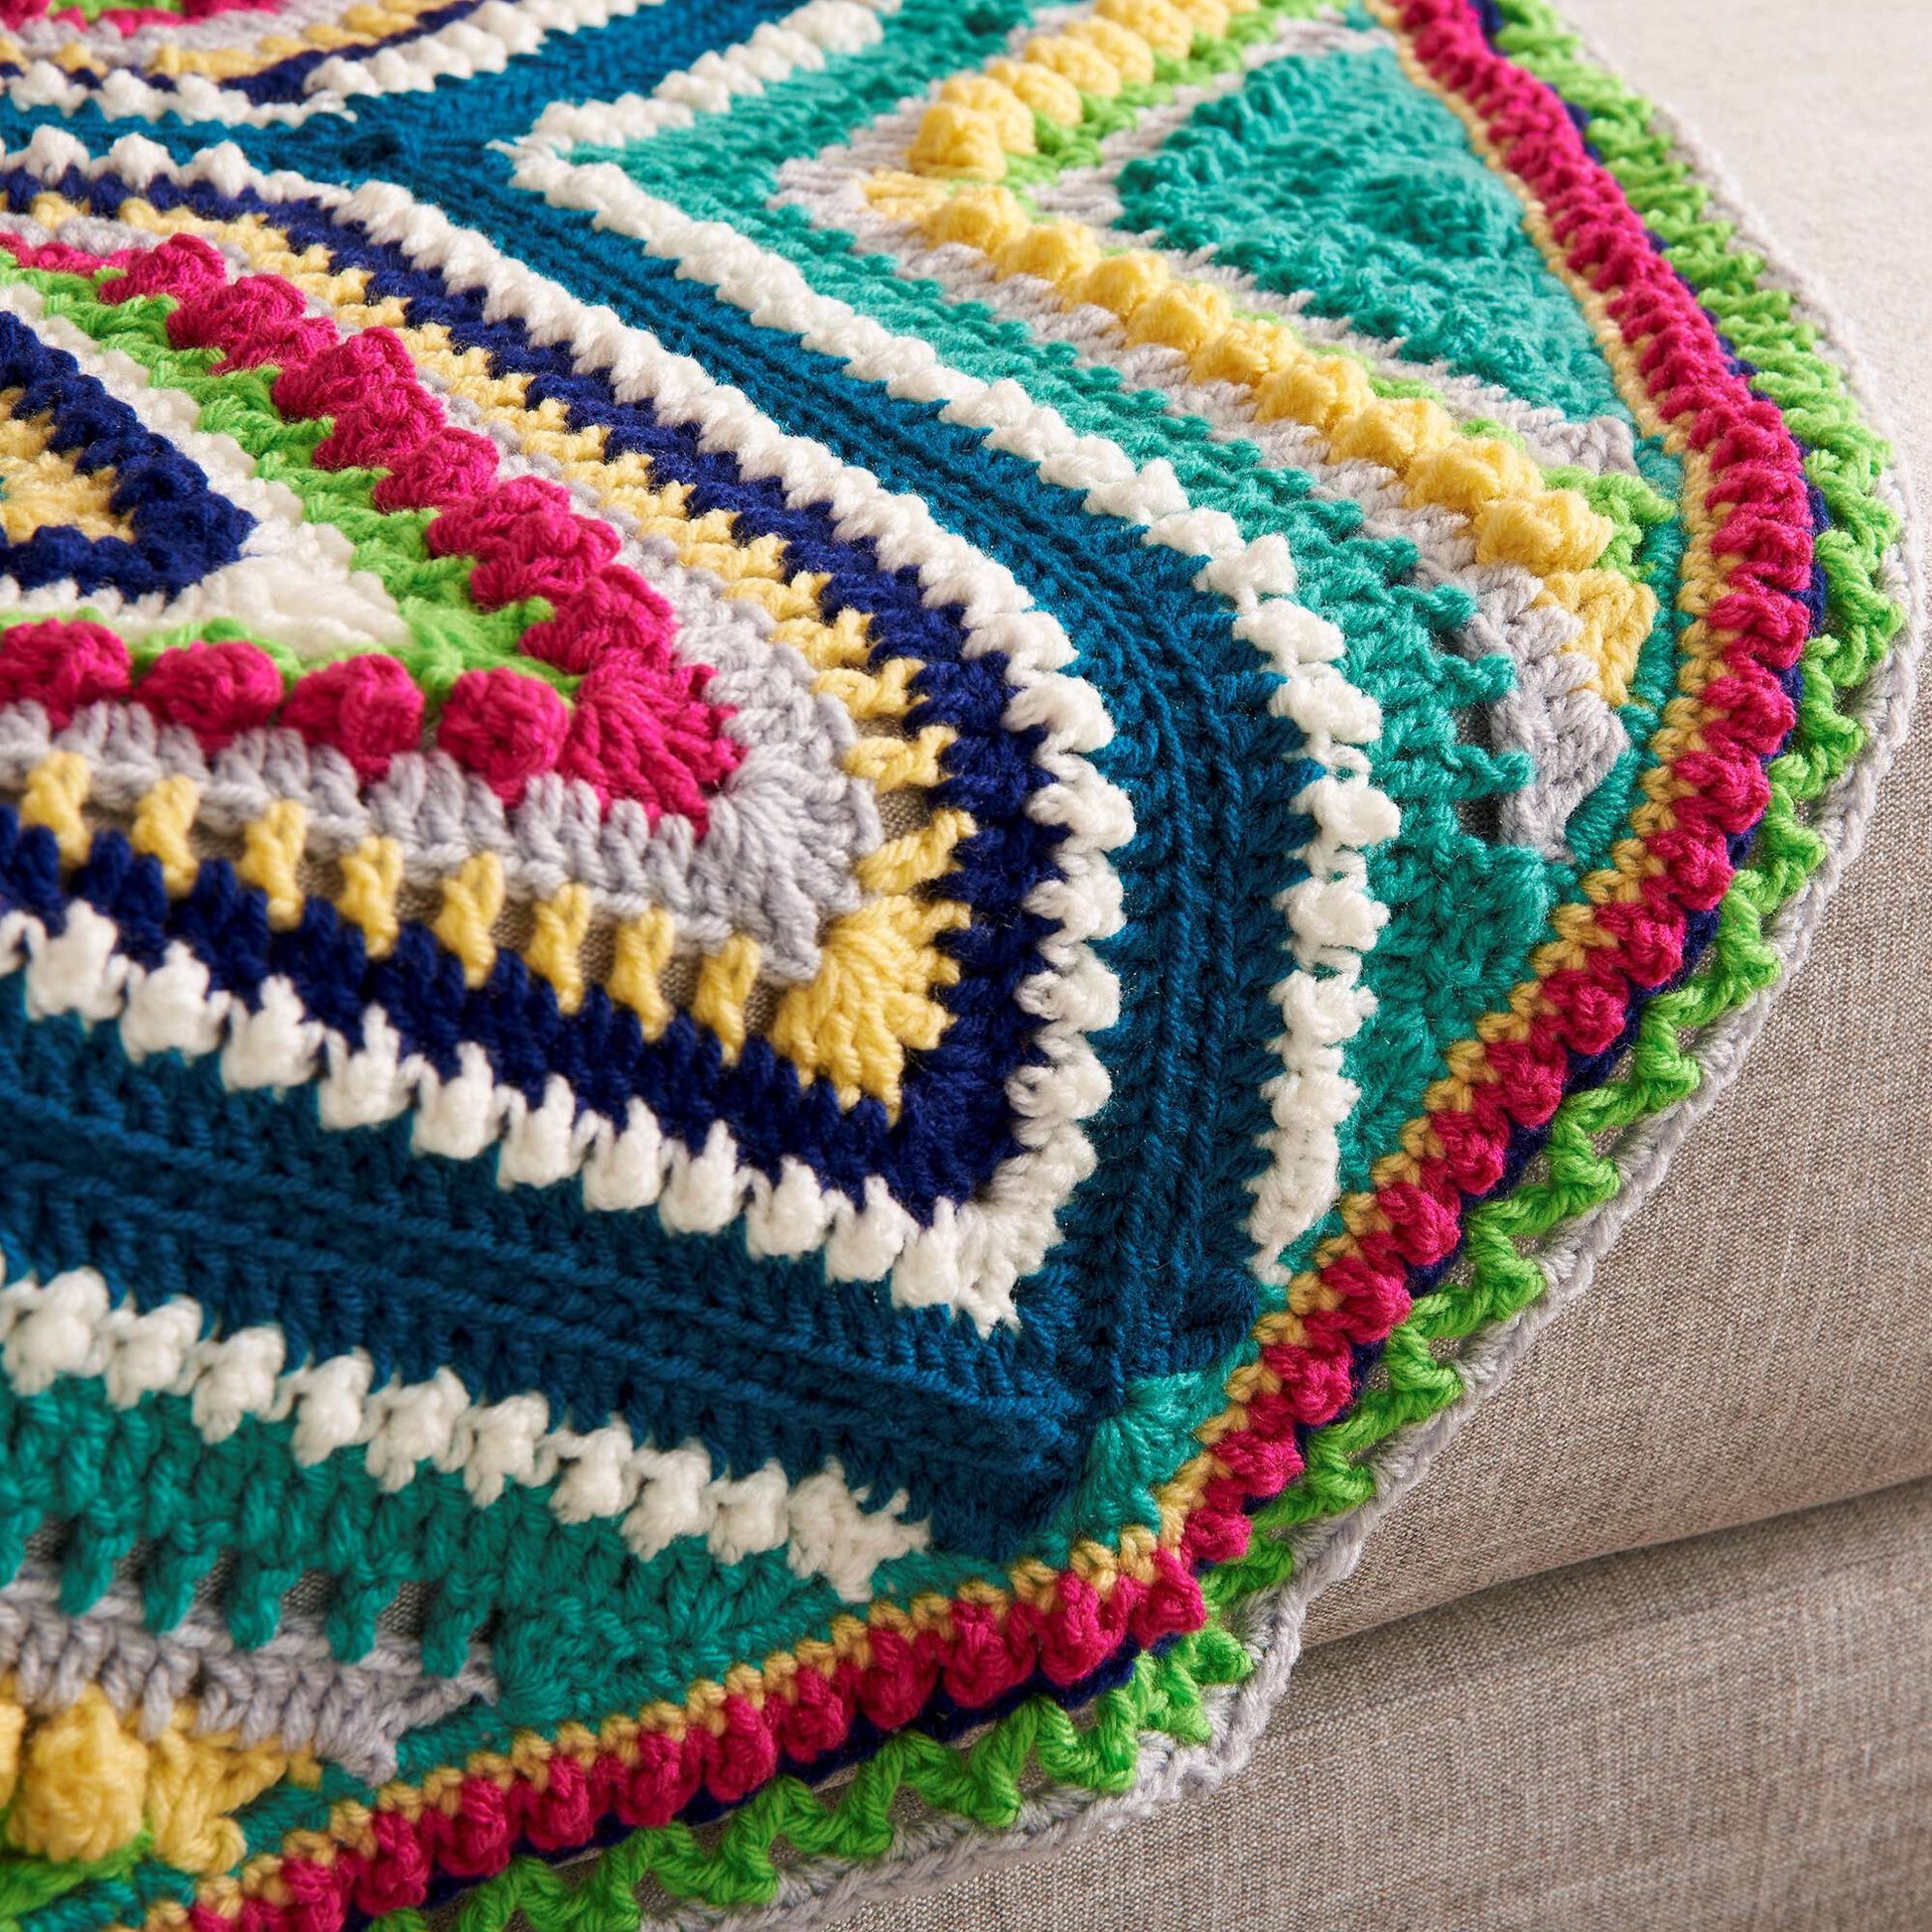 Learn customizing crochet patterns with Red Heart Yarns 